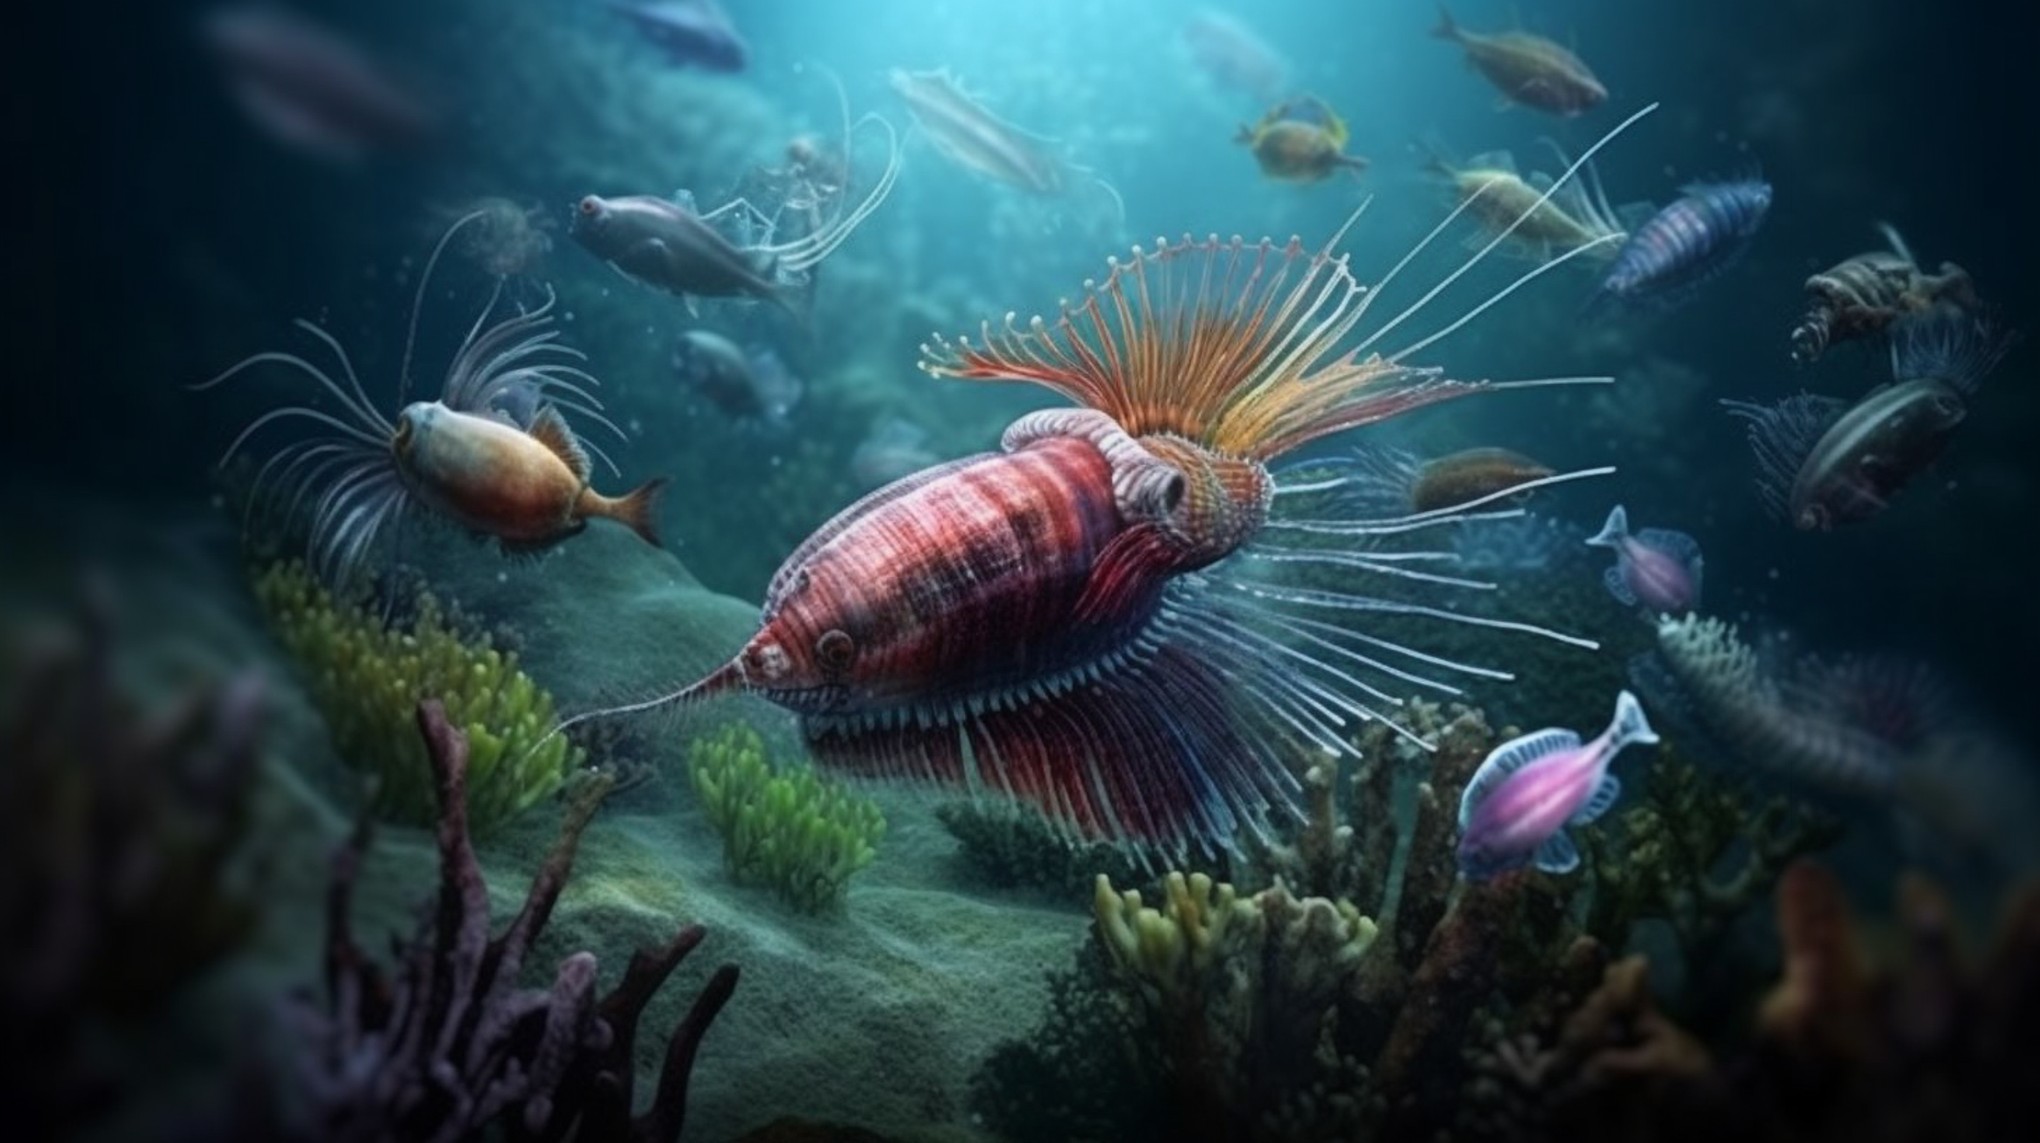 They discover a 'miniature marine world' from 462 million years ago